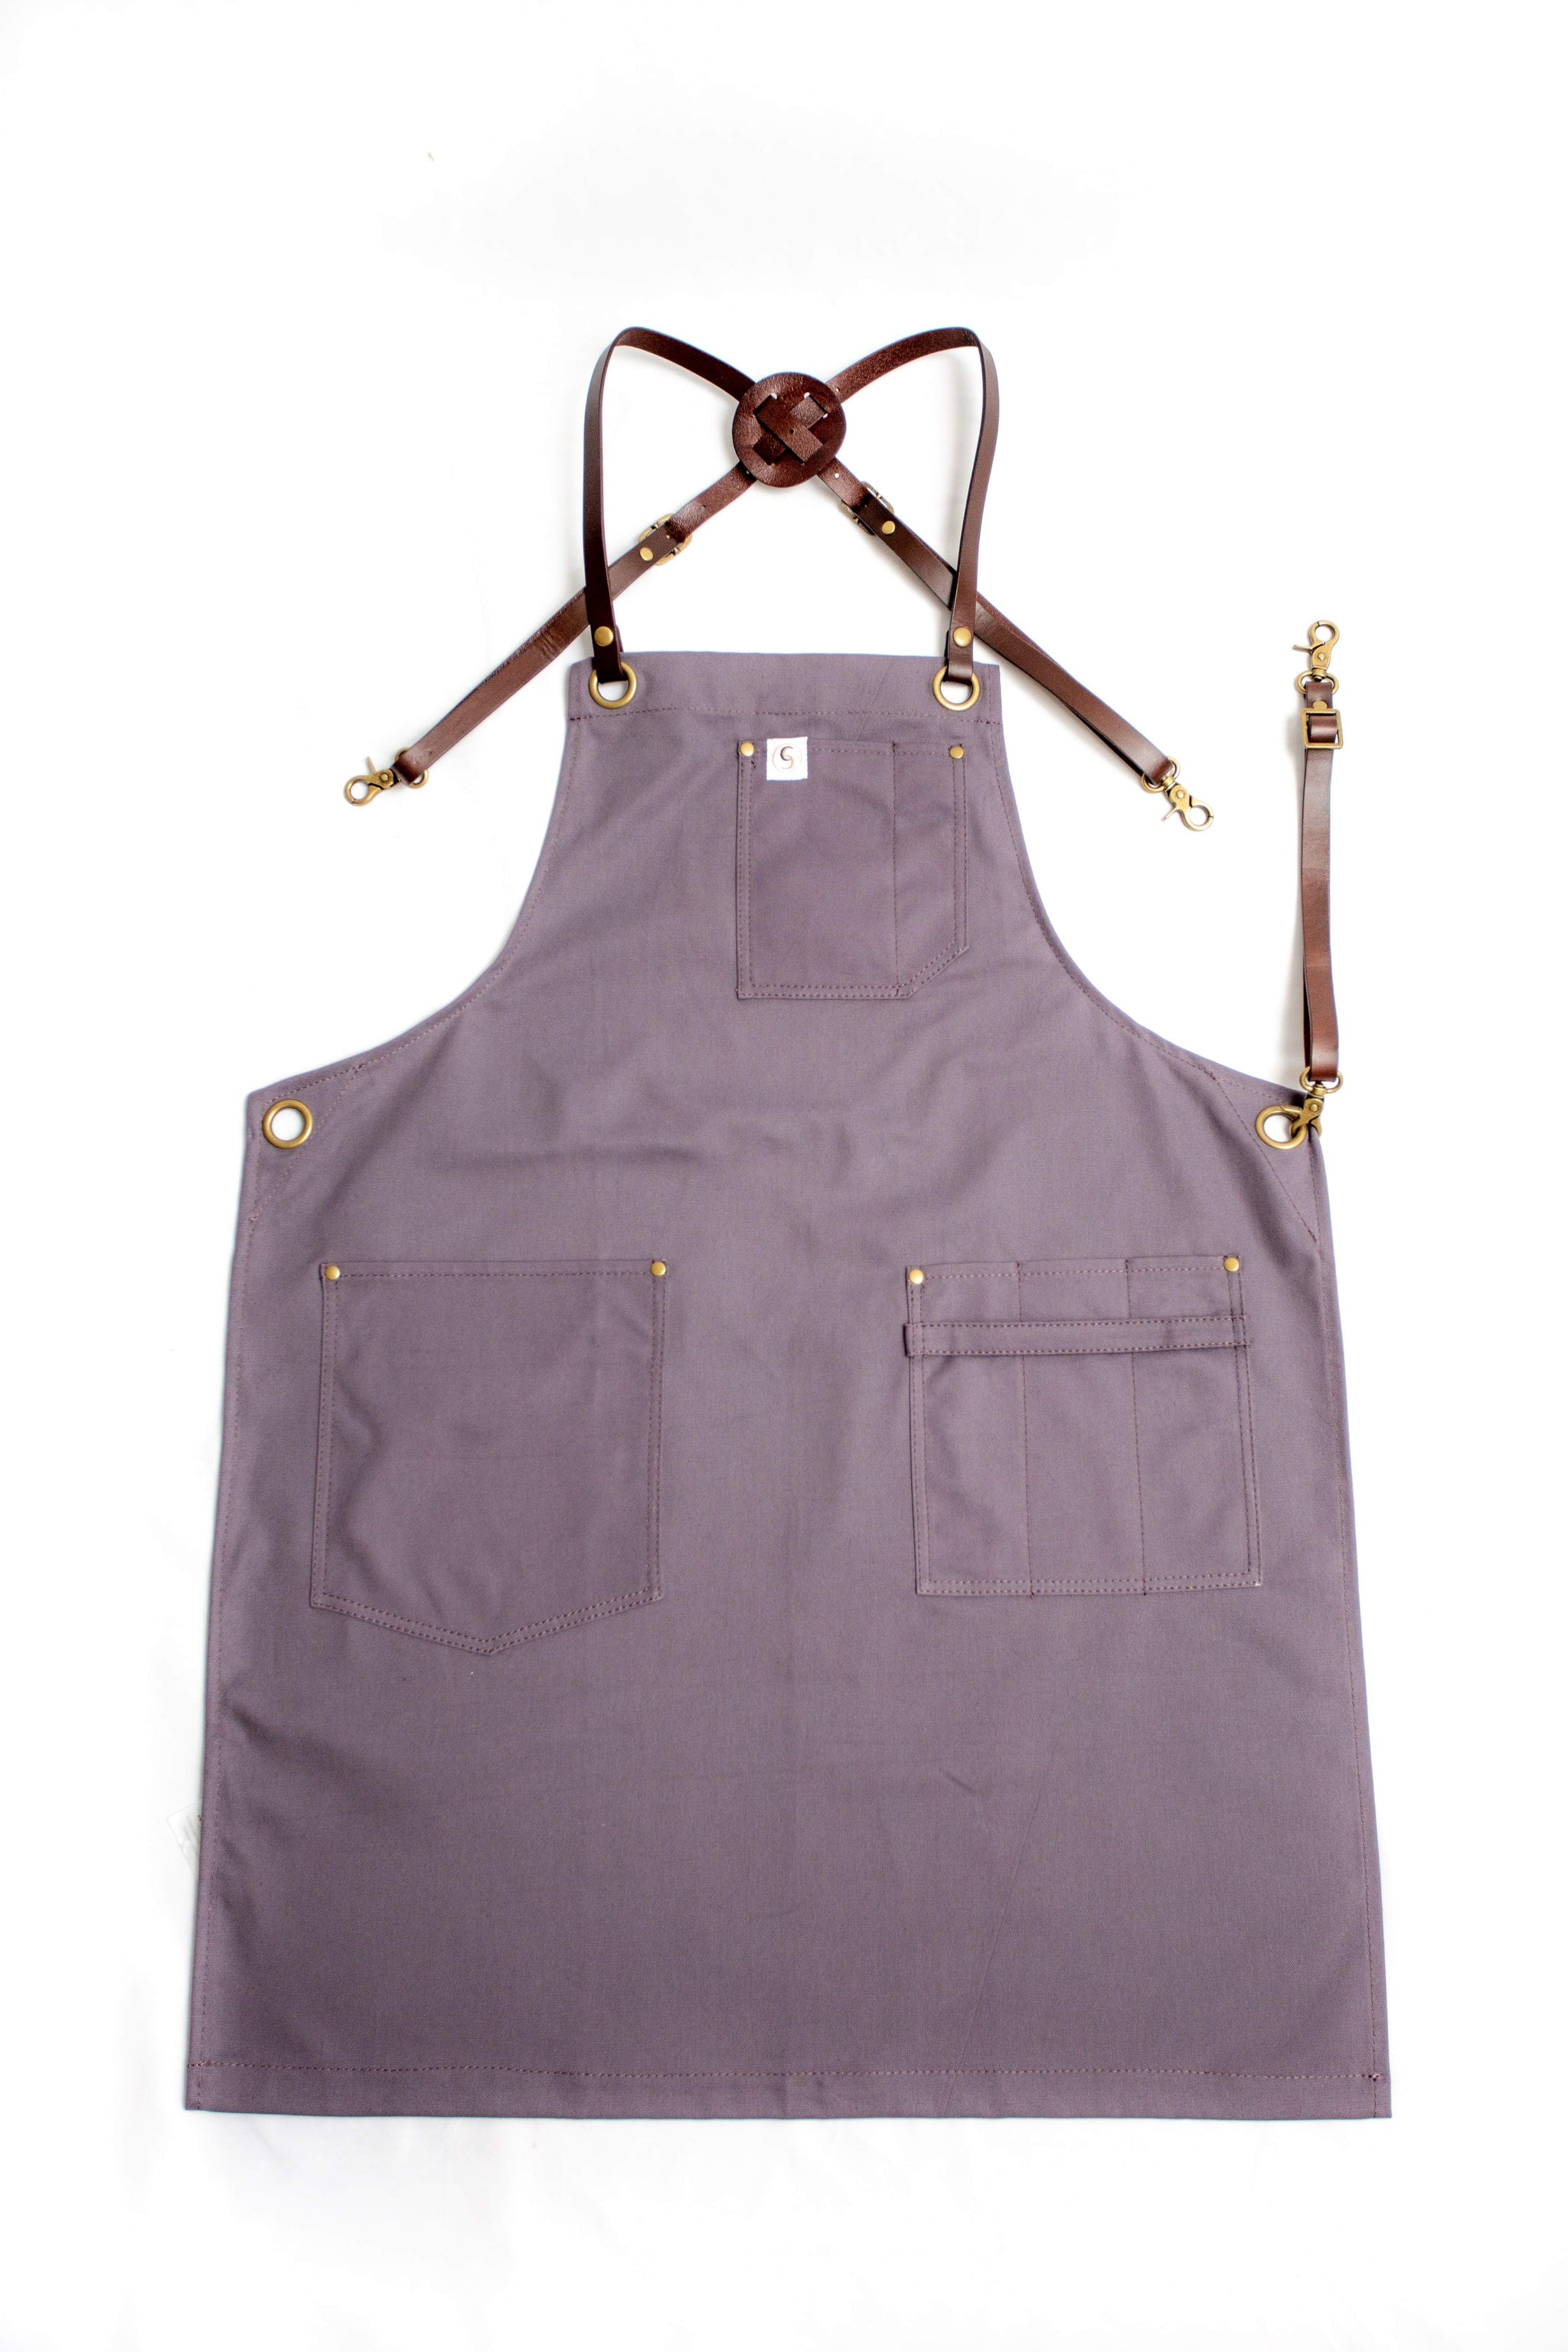 Leather Strap Waxed Canvas Aprons - Chef's Satchel